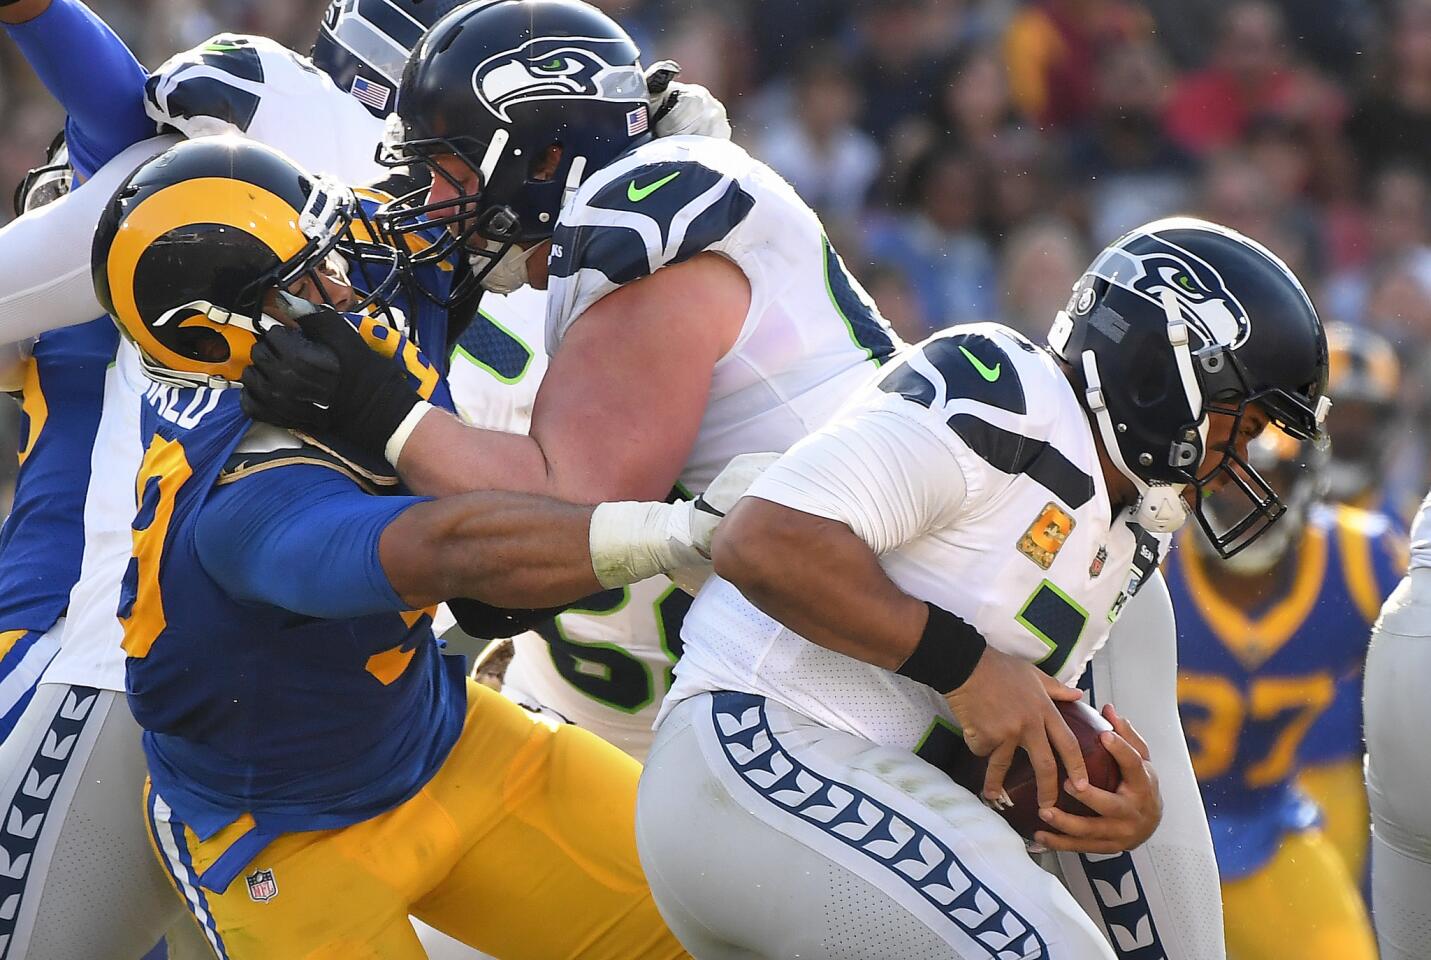 Rams defensive tackle Aaron Donald sacks Seattle Seahawks quarterback Russell Wilson in the second quarter at the Coliseum on Sunday.